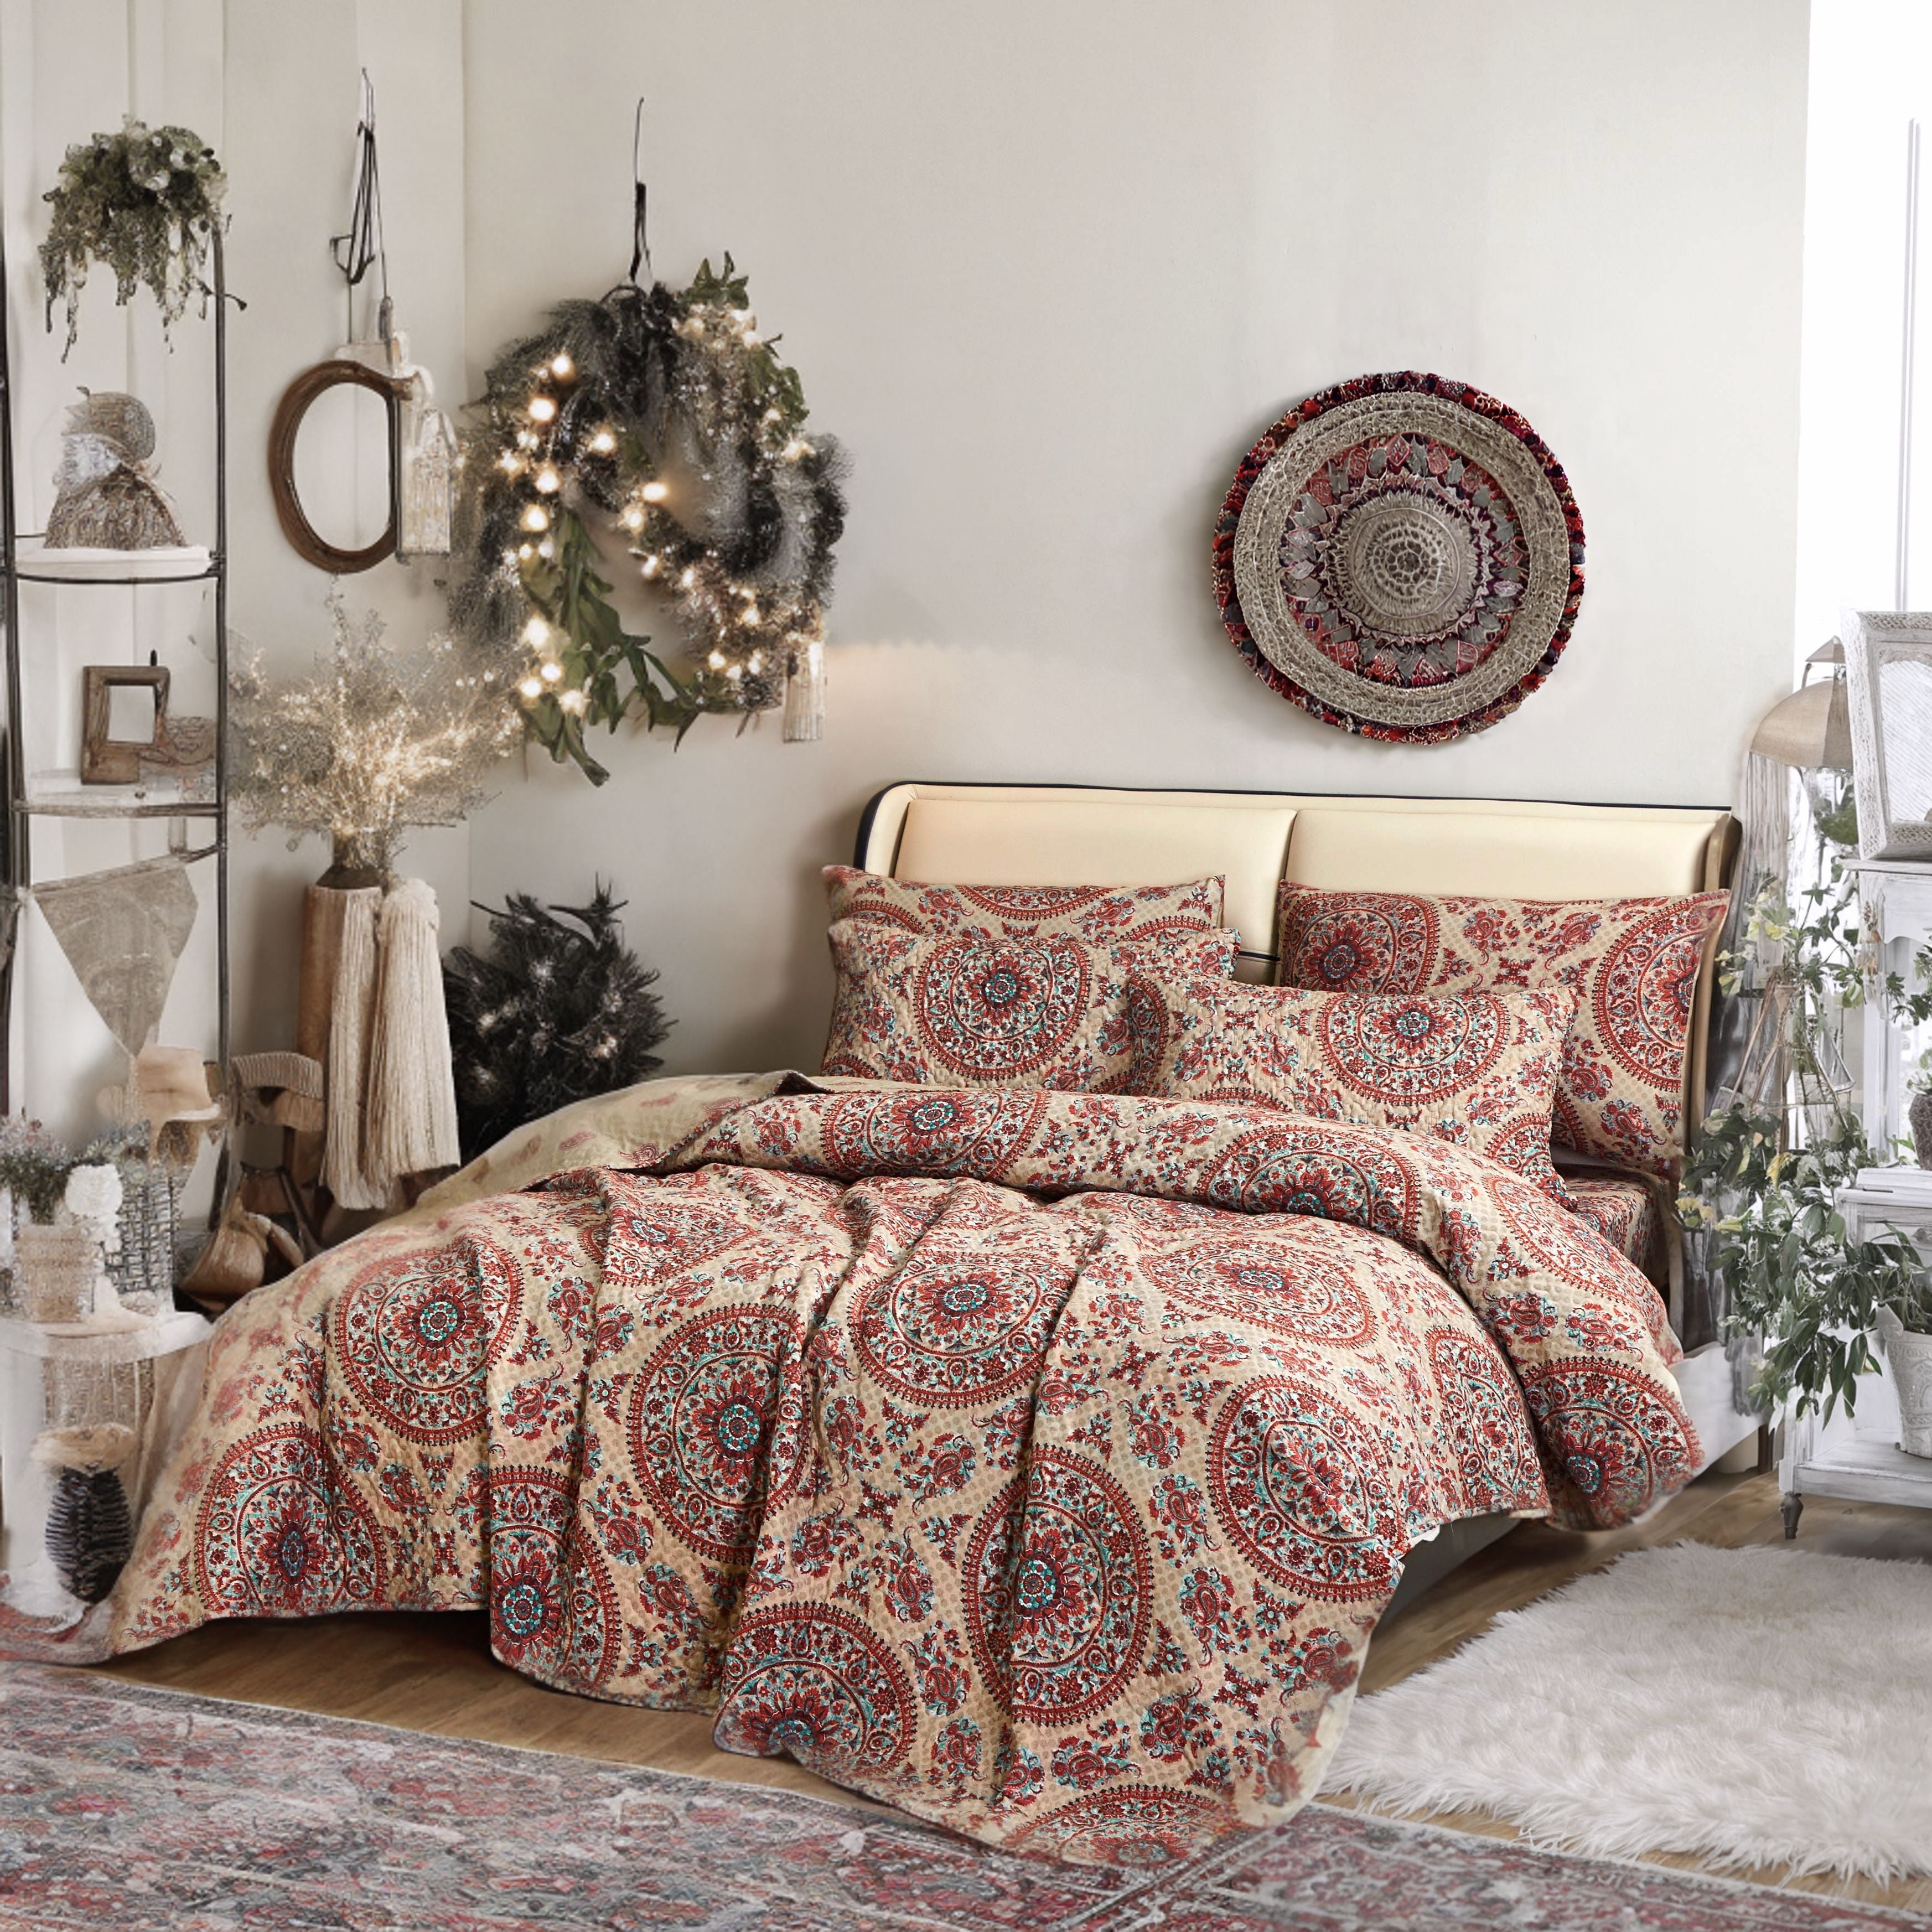 This reversible bohemian medallion paisley print quilt features a stunning medallion motif on one side and a coordinating paisley print on the other. It's both stylish and comfortable, making it a versatile addition to any bedroom